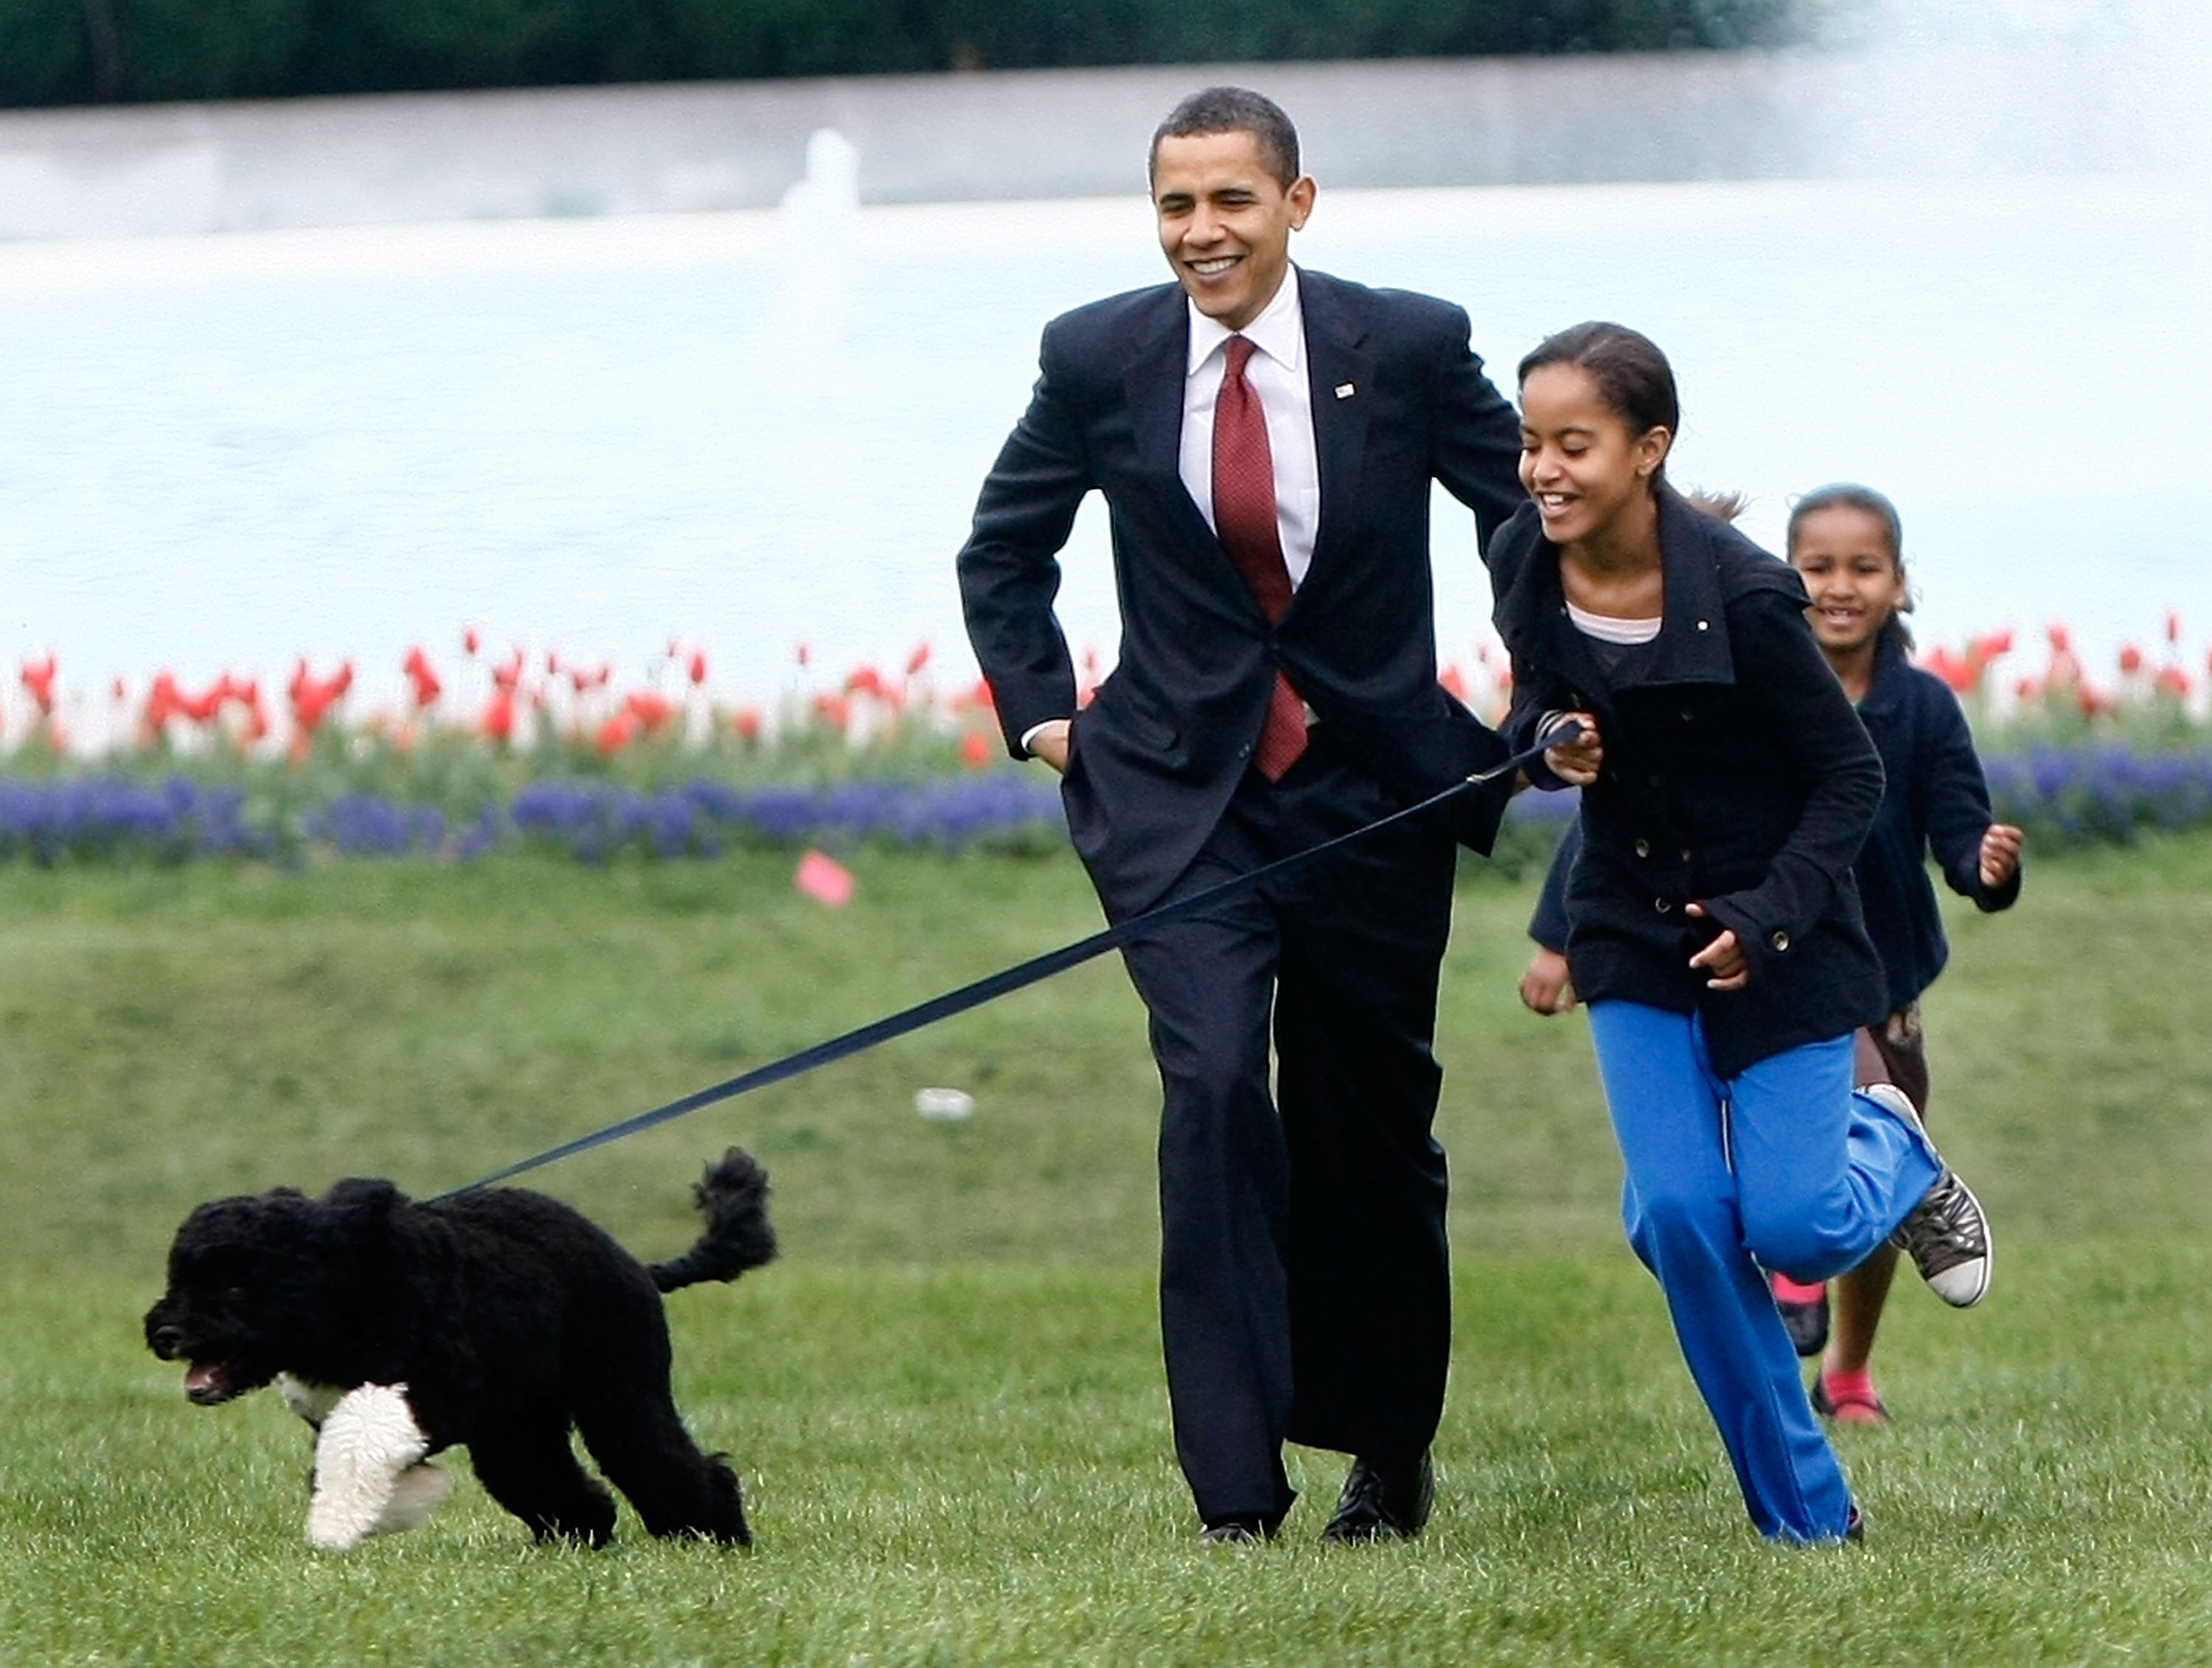 Barack Obama with his daughters Malia (C) and Sasha (R) walk the family's new Portuguese water dog Bo, on the South Lawn of the White House on April 14, 2009. The six-month-old puppy was a gift from Sen. Edward M. Kennedy (D-MA), who owns several Portuguese water dogs himself. This breed of dog is considered a good pet for children who have allergies, as Malia does.